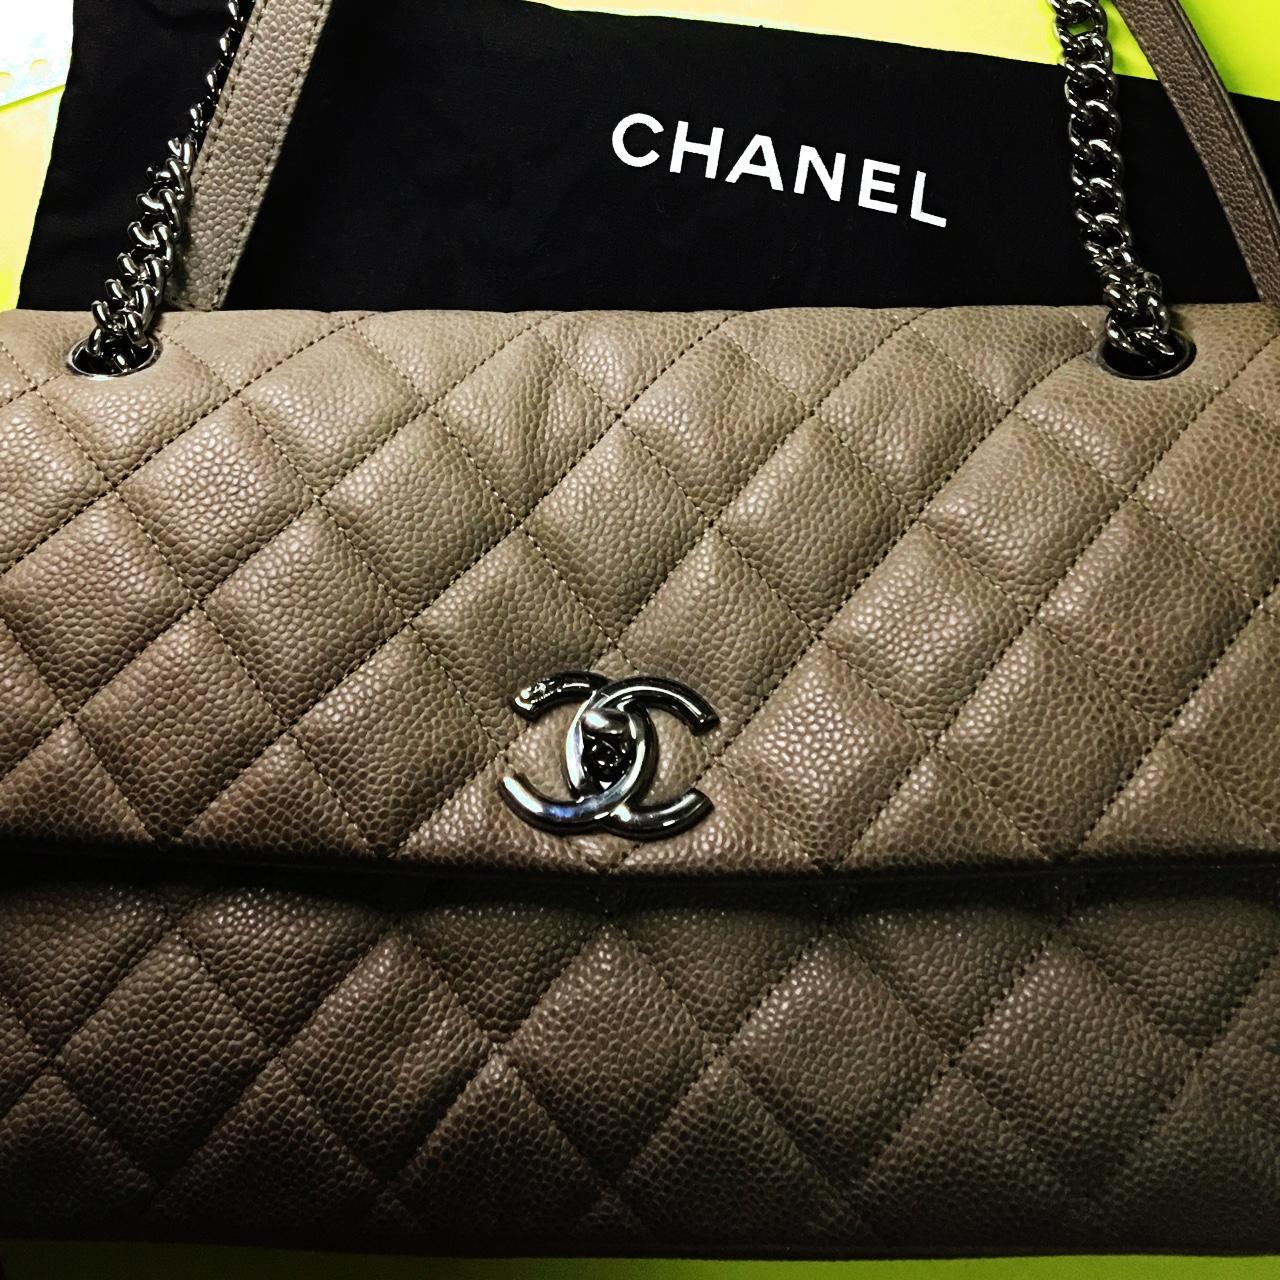 Chanel handbags in taupe colour. Good condition with - Depop